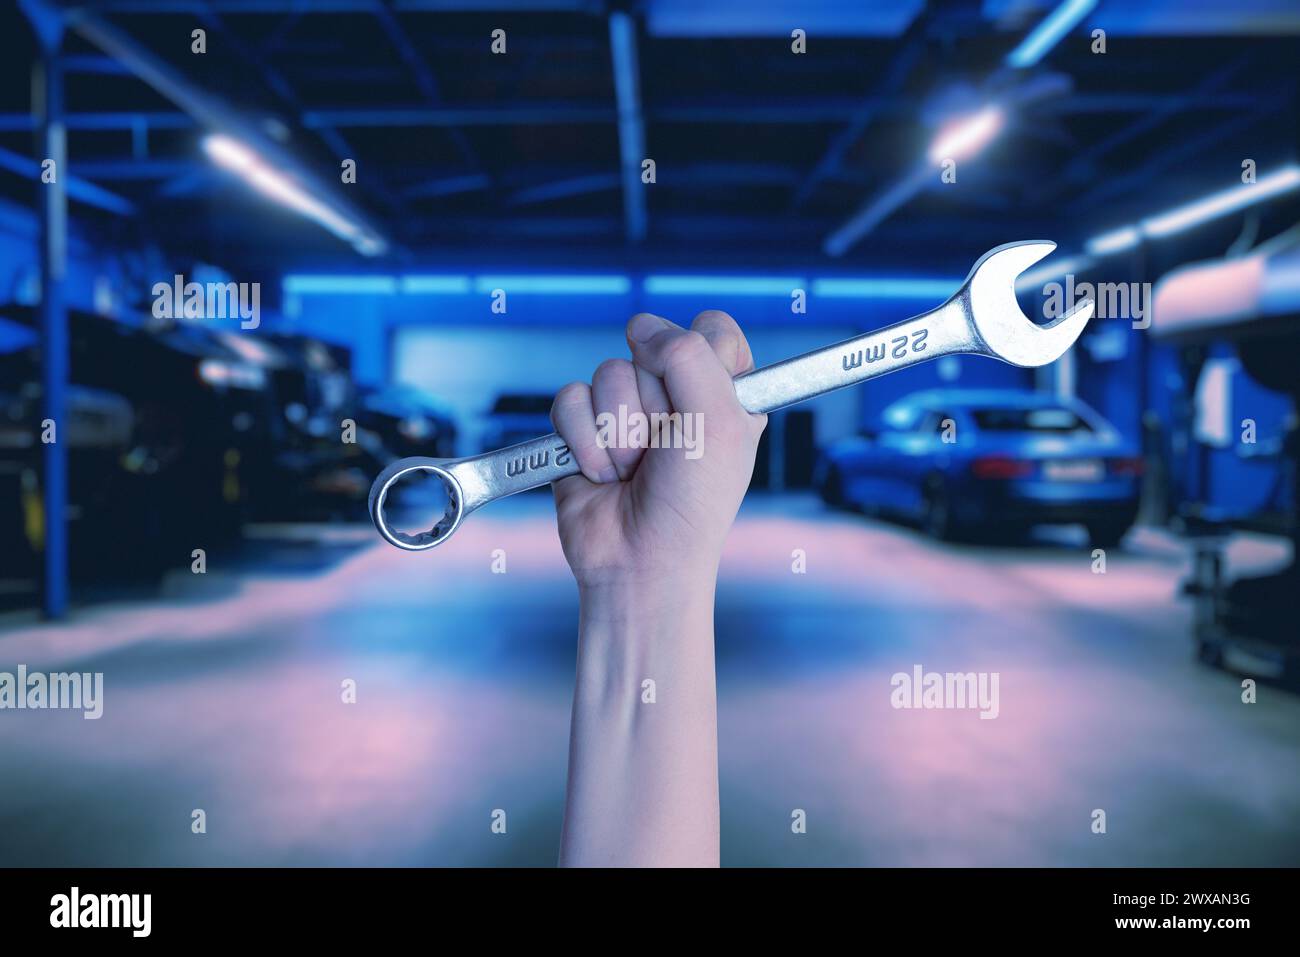 Wrench held in hand inside a car service garage. Illustrating the car service concept with automotive repair and maintenance Stock Photo